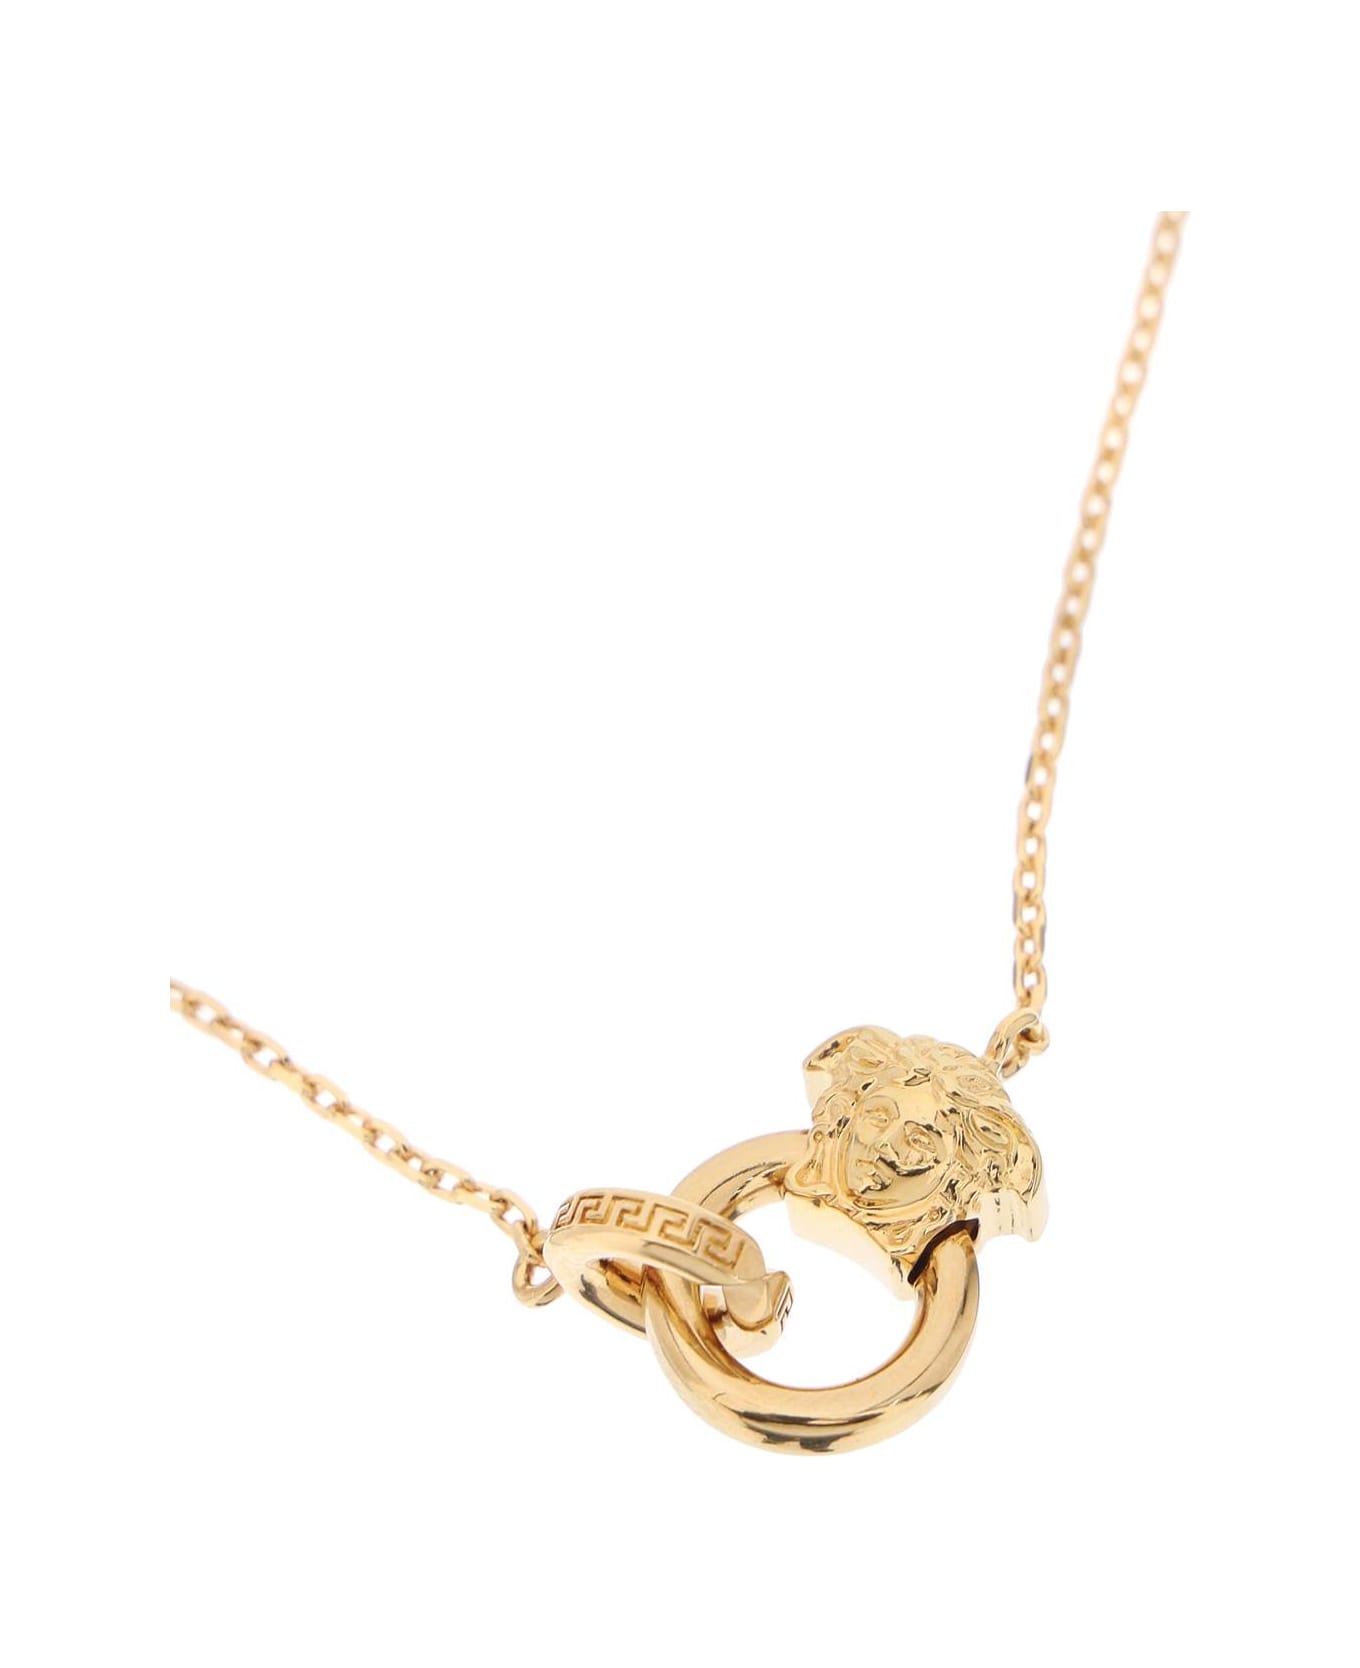 Versace Medusa Rolo-chained Polished Finish Necklace - VERSACE GOLD (Gold) ネックレス